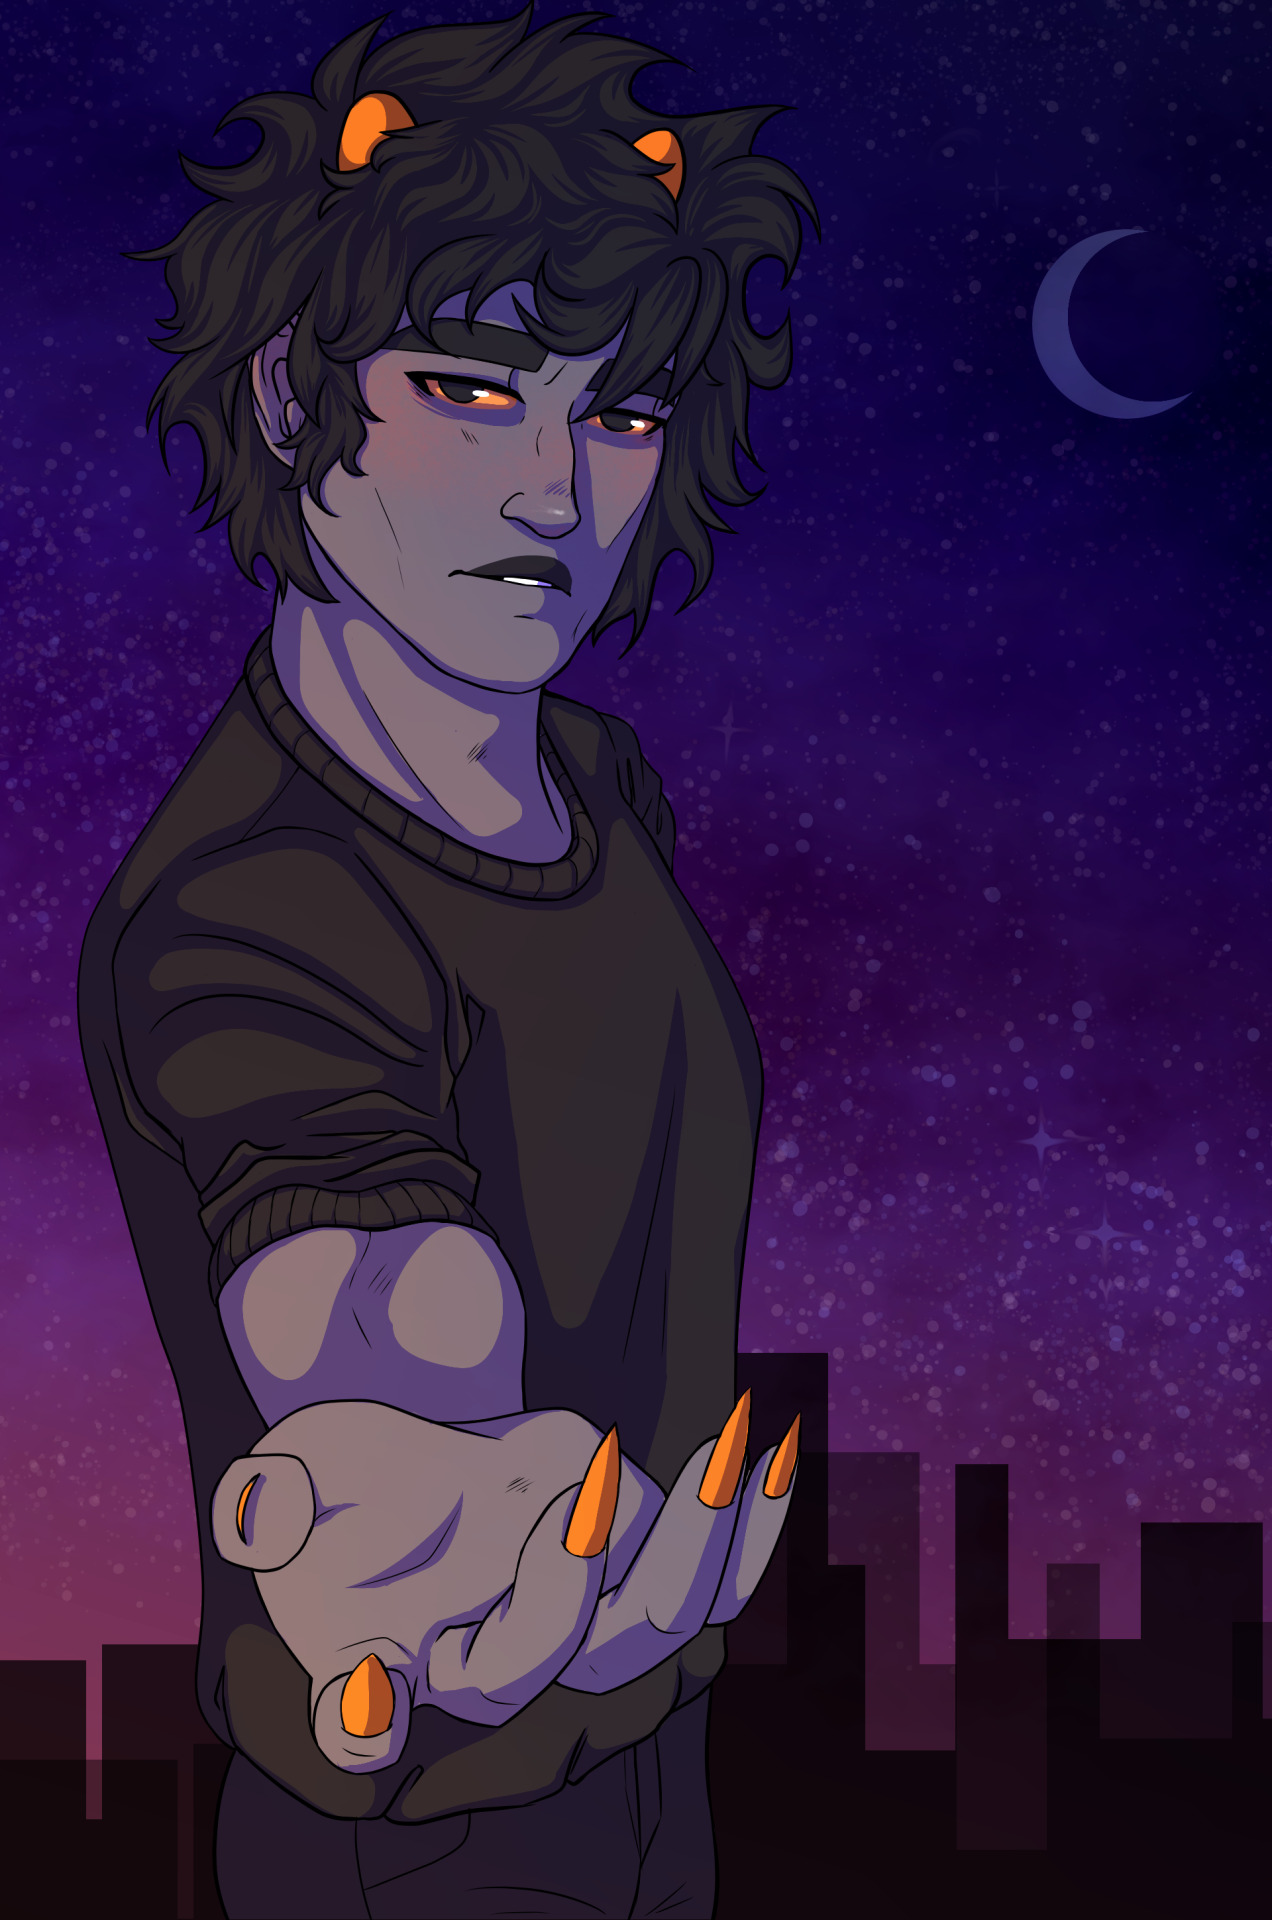 Karkat offers you his hand, will you take it? #a background??? in my post?? its more likely than you think  #im rly just making up scenarios for my own amusment  #ugh take me on adventures you stupid alien #karkat vantas #I love karkat so fucking much  #hot karkat summer #homestuck#art#karkat #one day im gonna finish a fic i swear to god  #its gonna be a blatant self insert